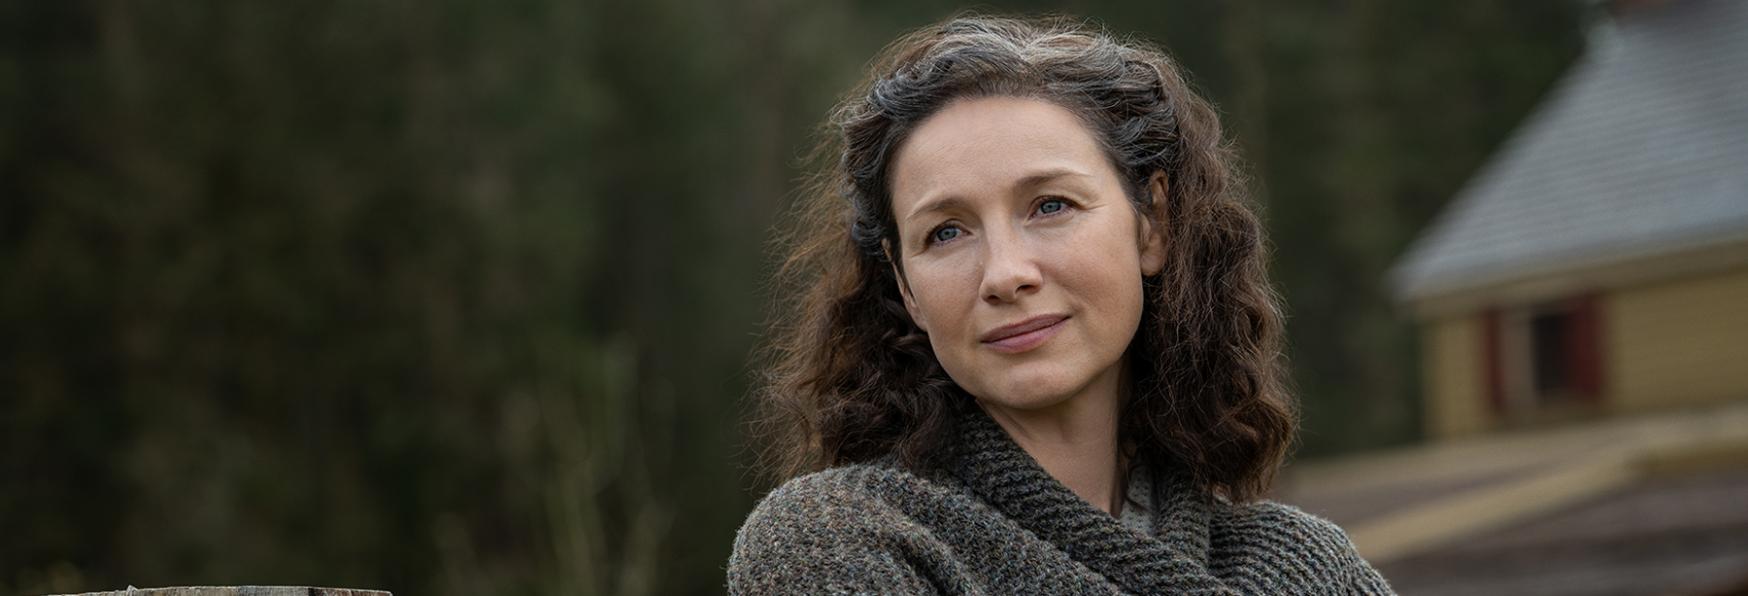 Outlander 7: the Official Trailer and the Release Date of the new Season